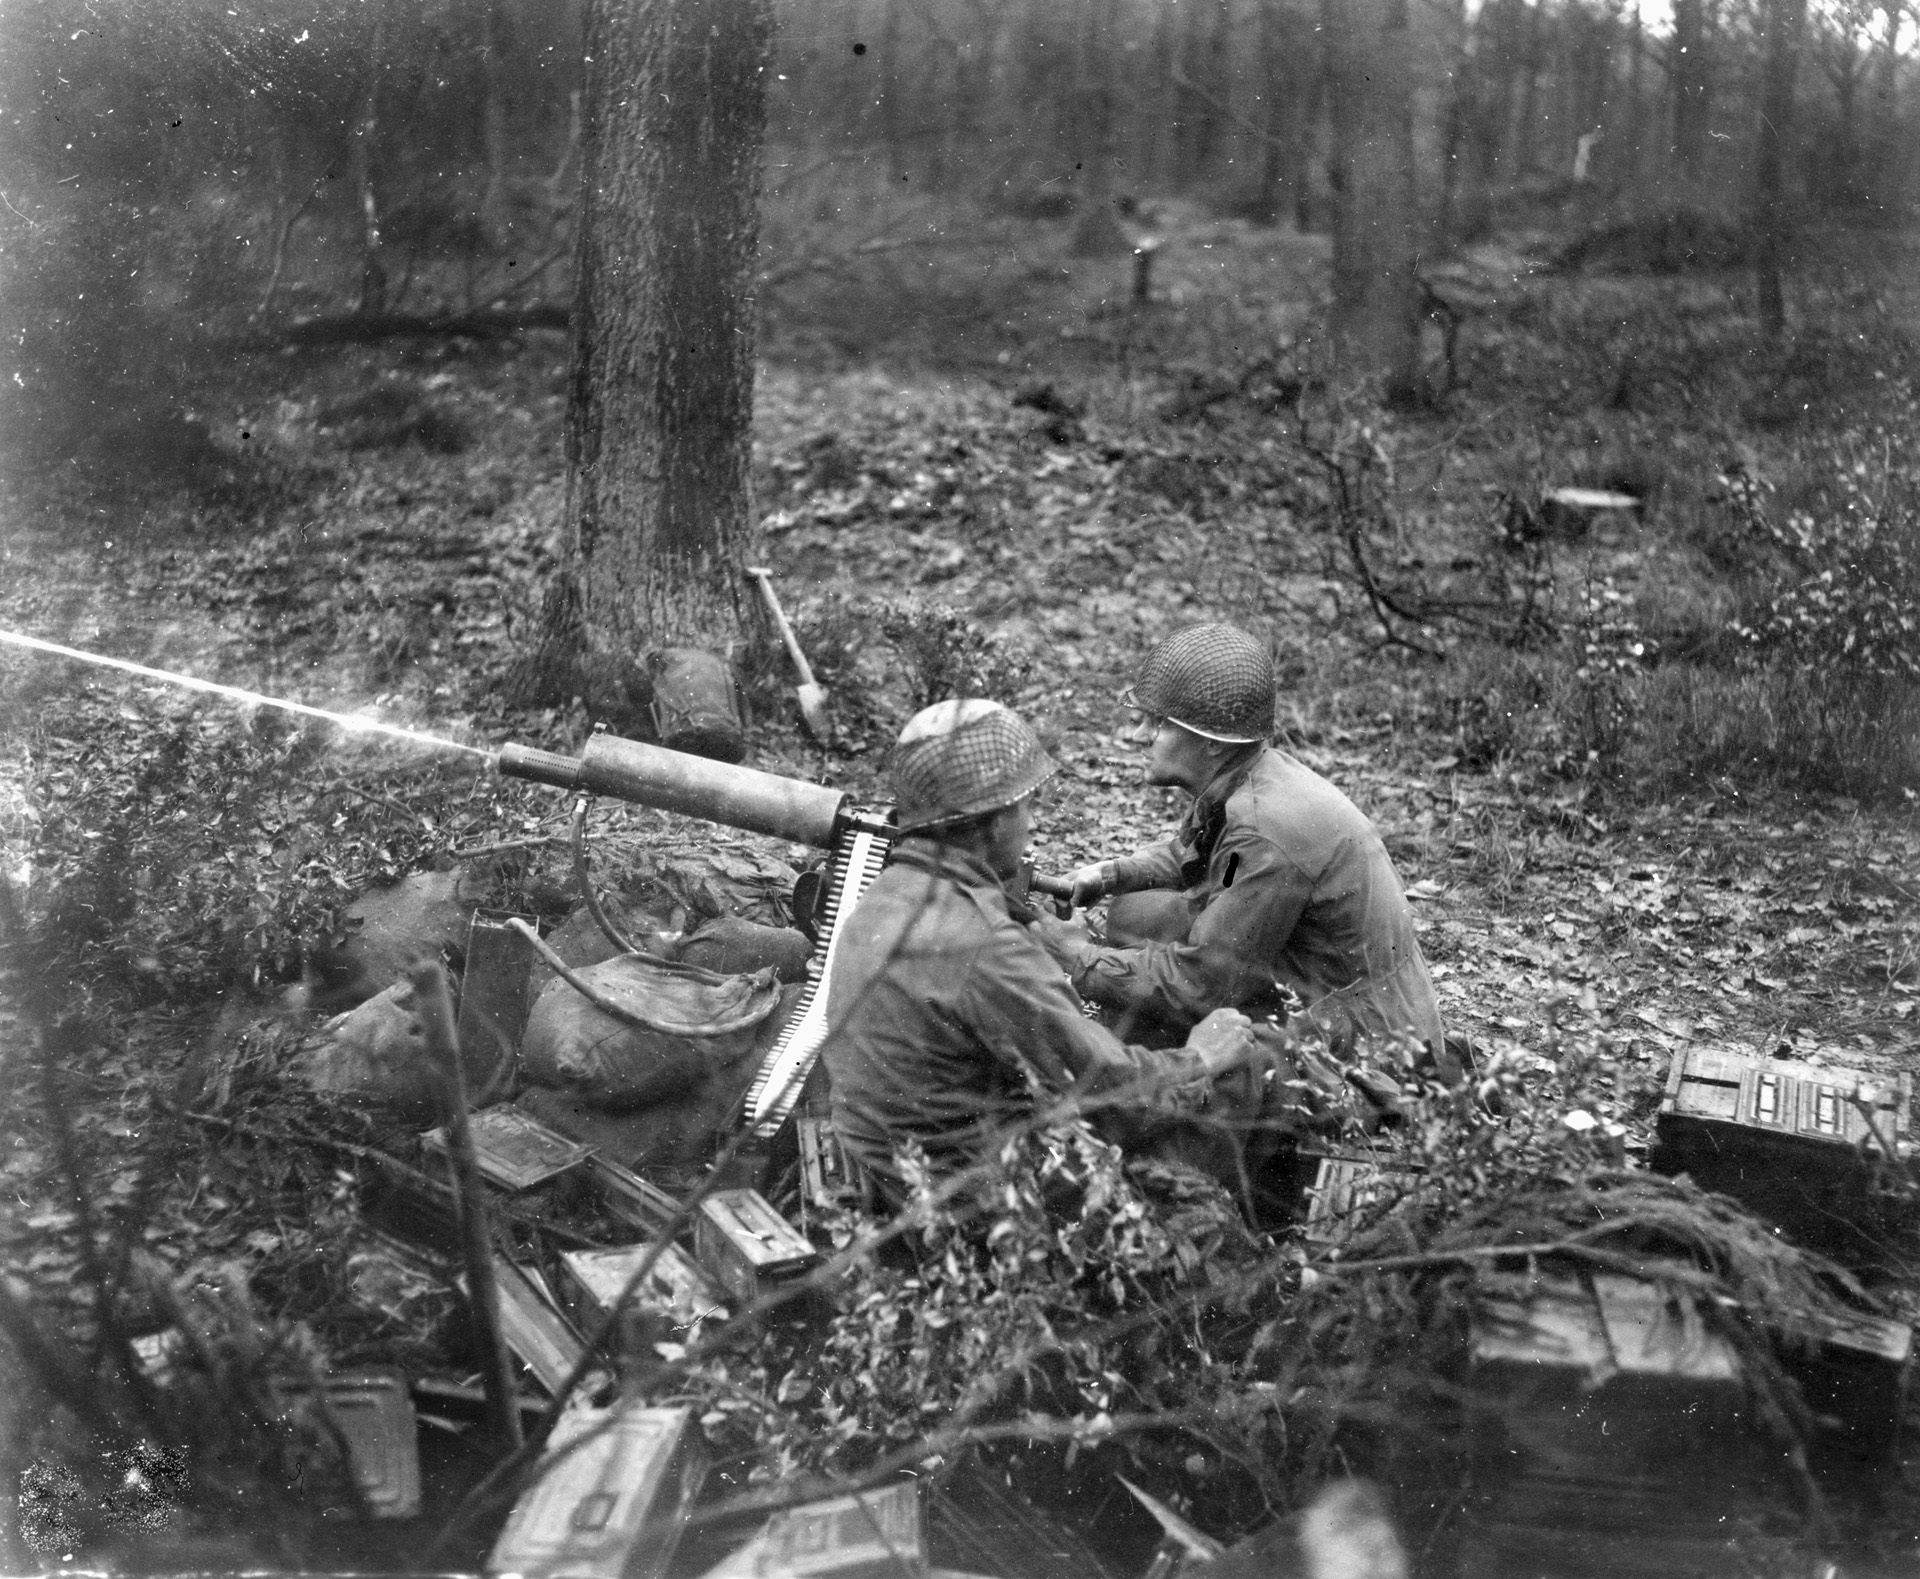 A .30-caliber machine-gun crew of Company D, 39th Regiment, 9th Infantry Division, fires a stream of bullets into the forest.